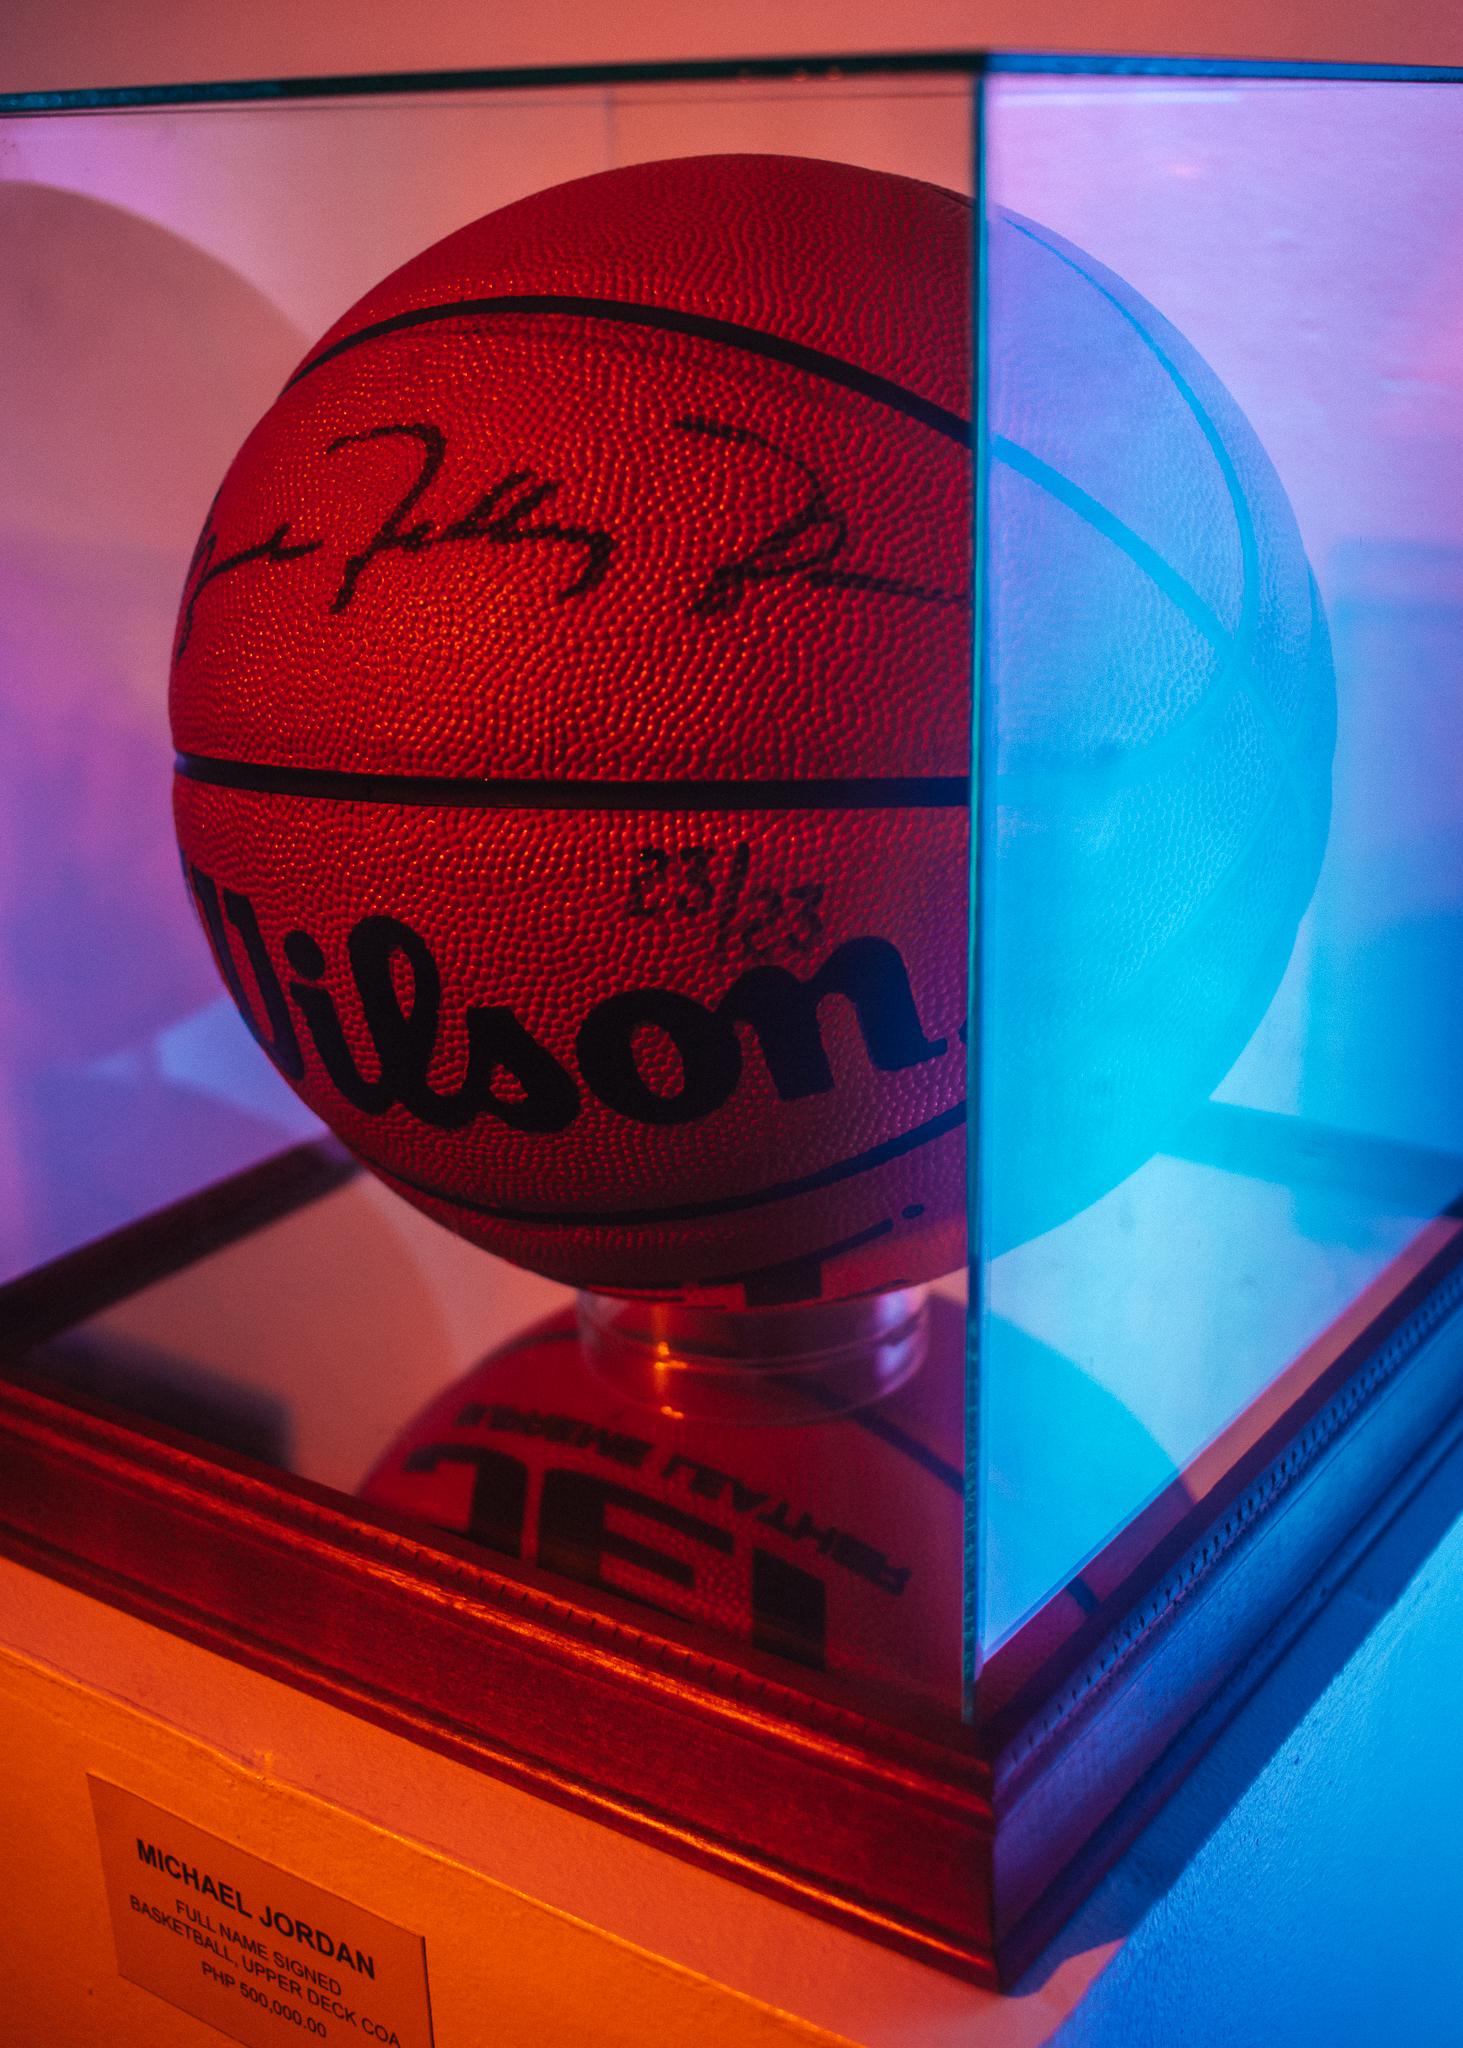 This Michael Jordan-signed basketball retails for P500,000